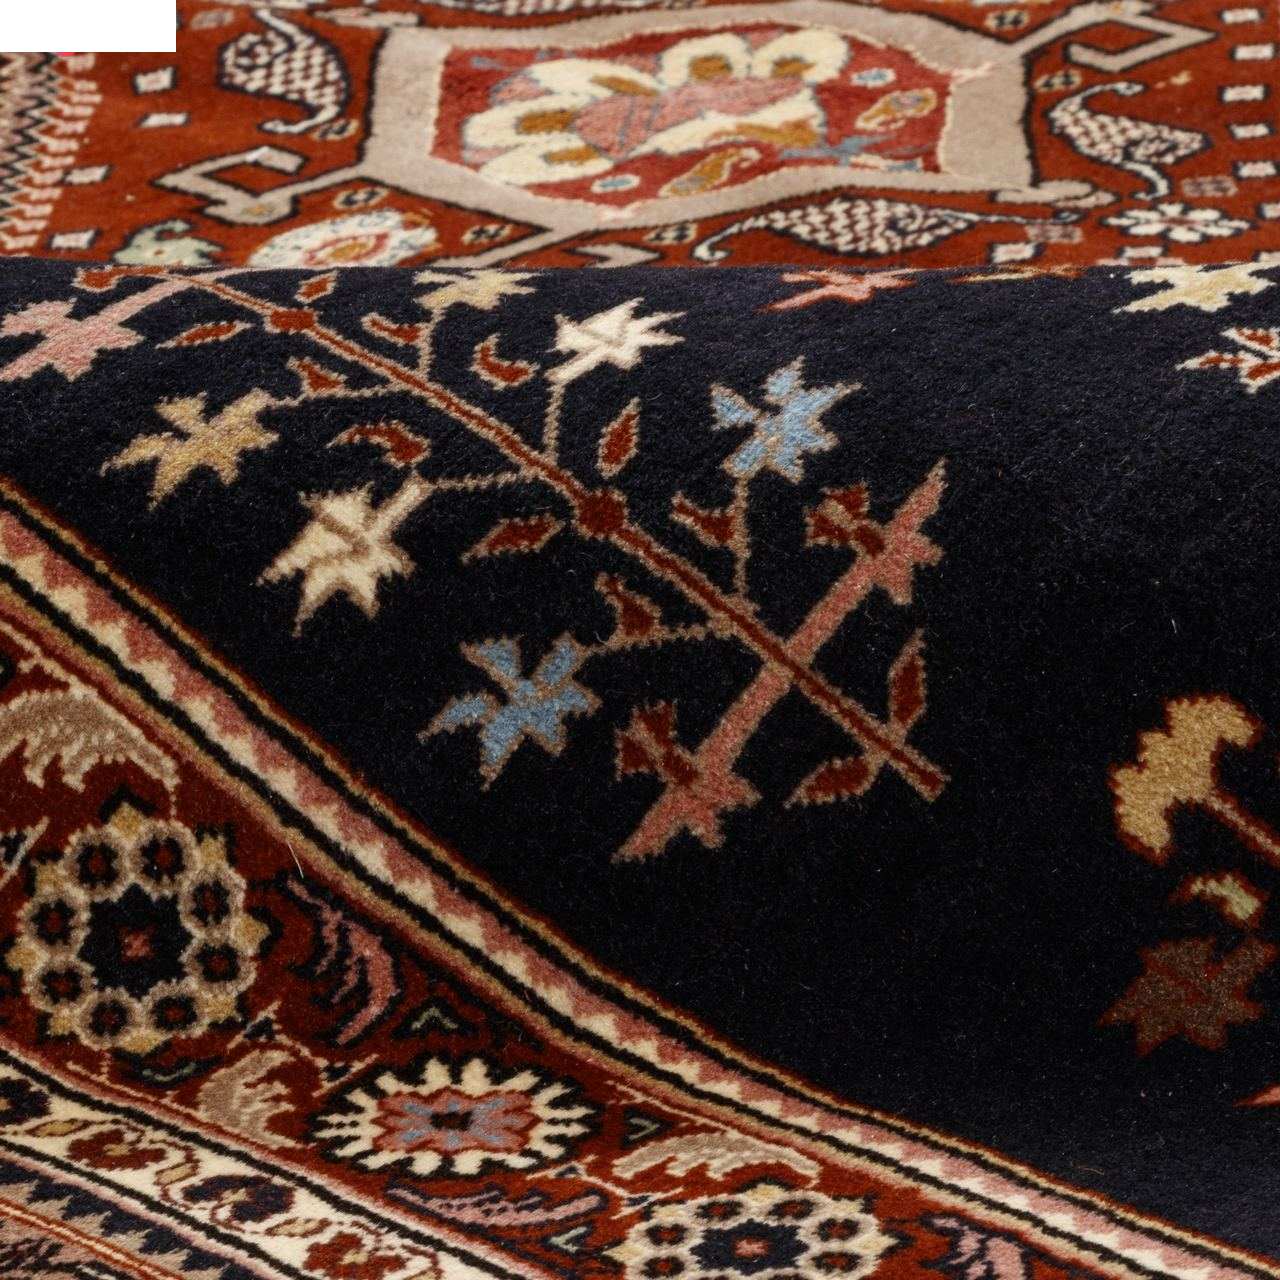 Eight and a half meter hand-woven carpet of Persia, code 174586